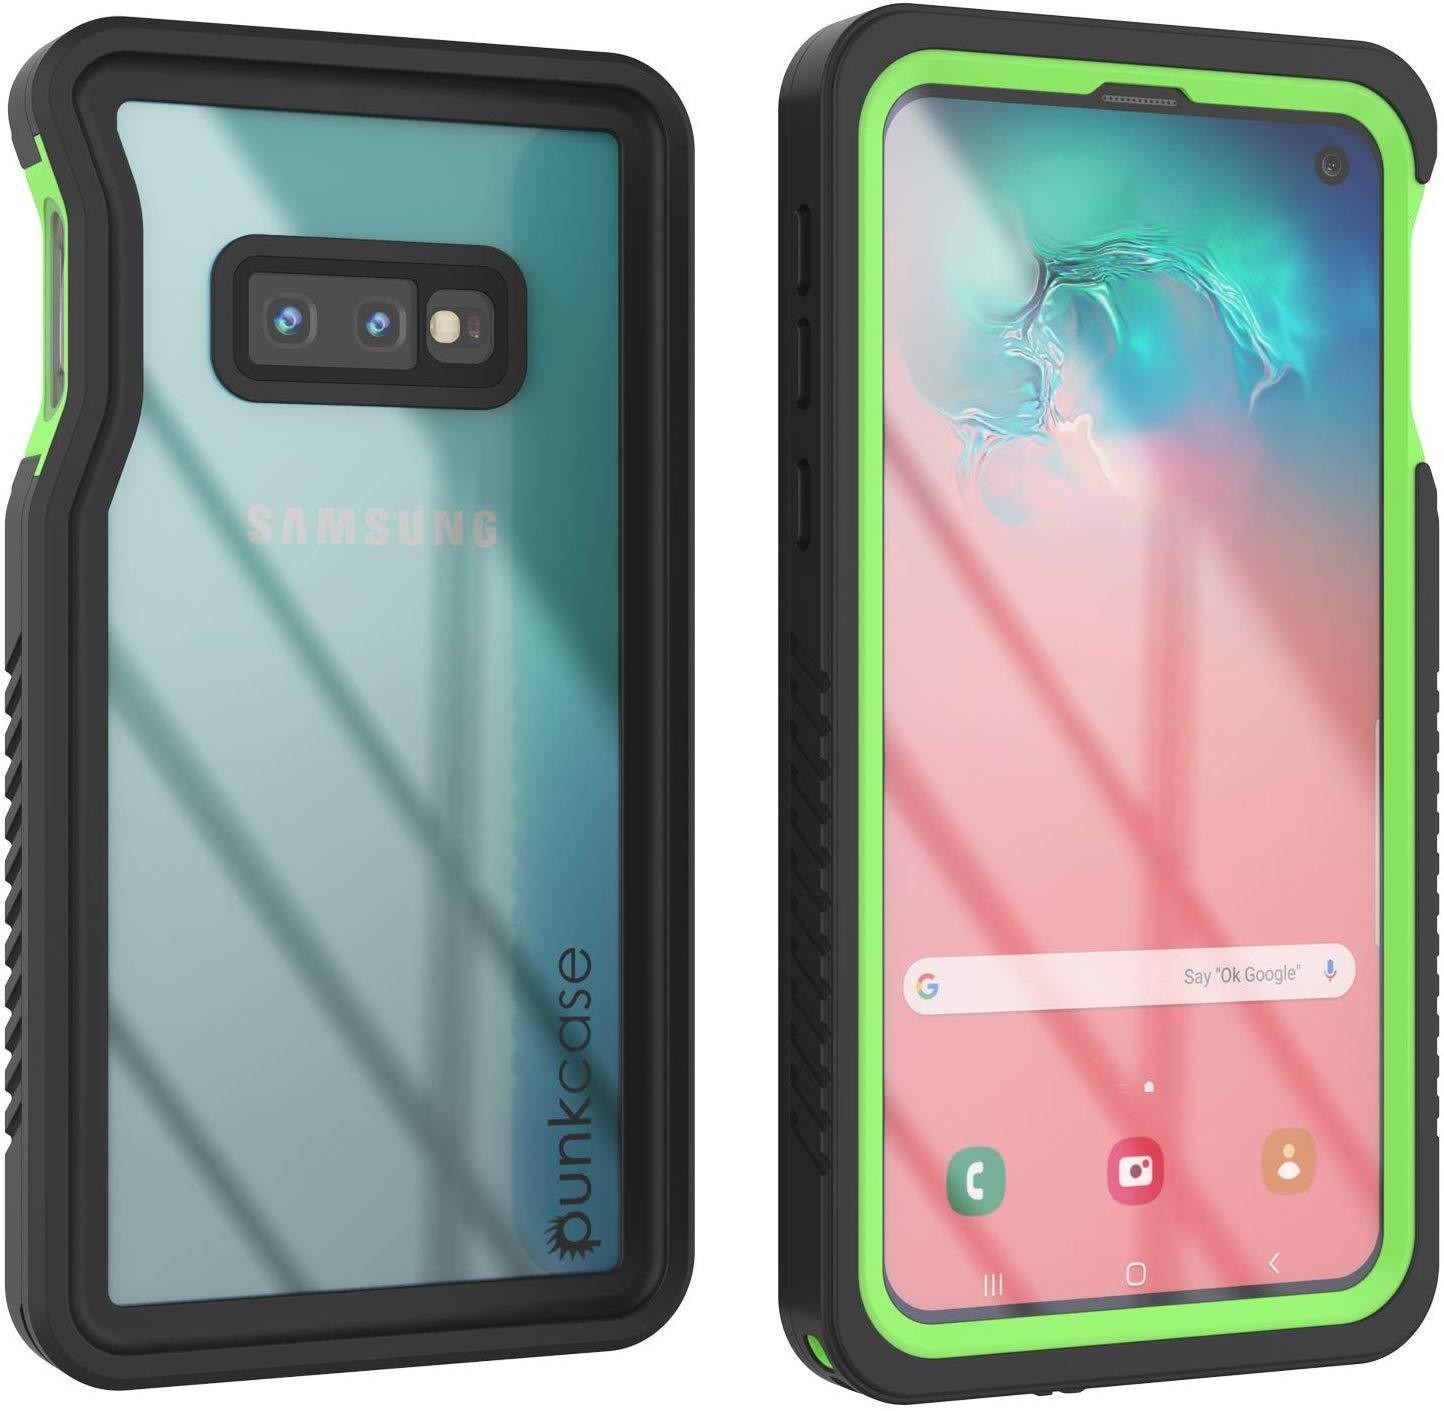 Galaxy S10 Water/Shockproof Screen Protector Case [Light Green]